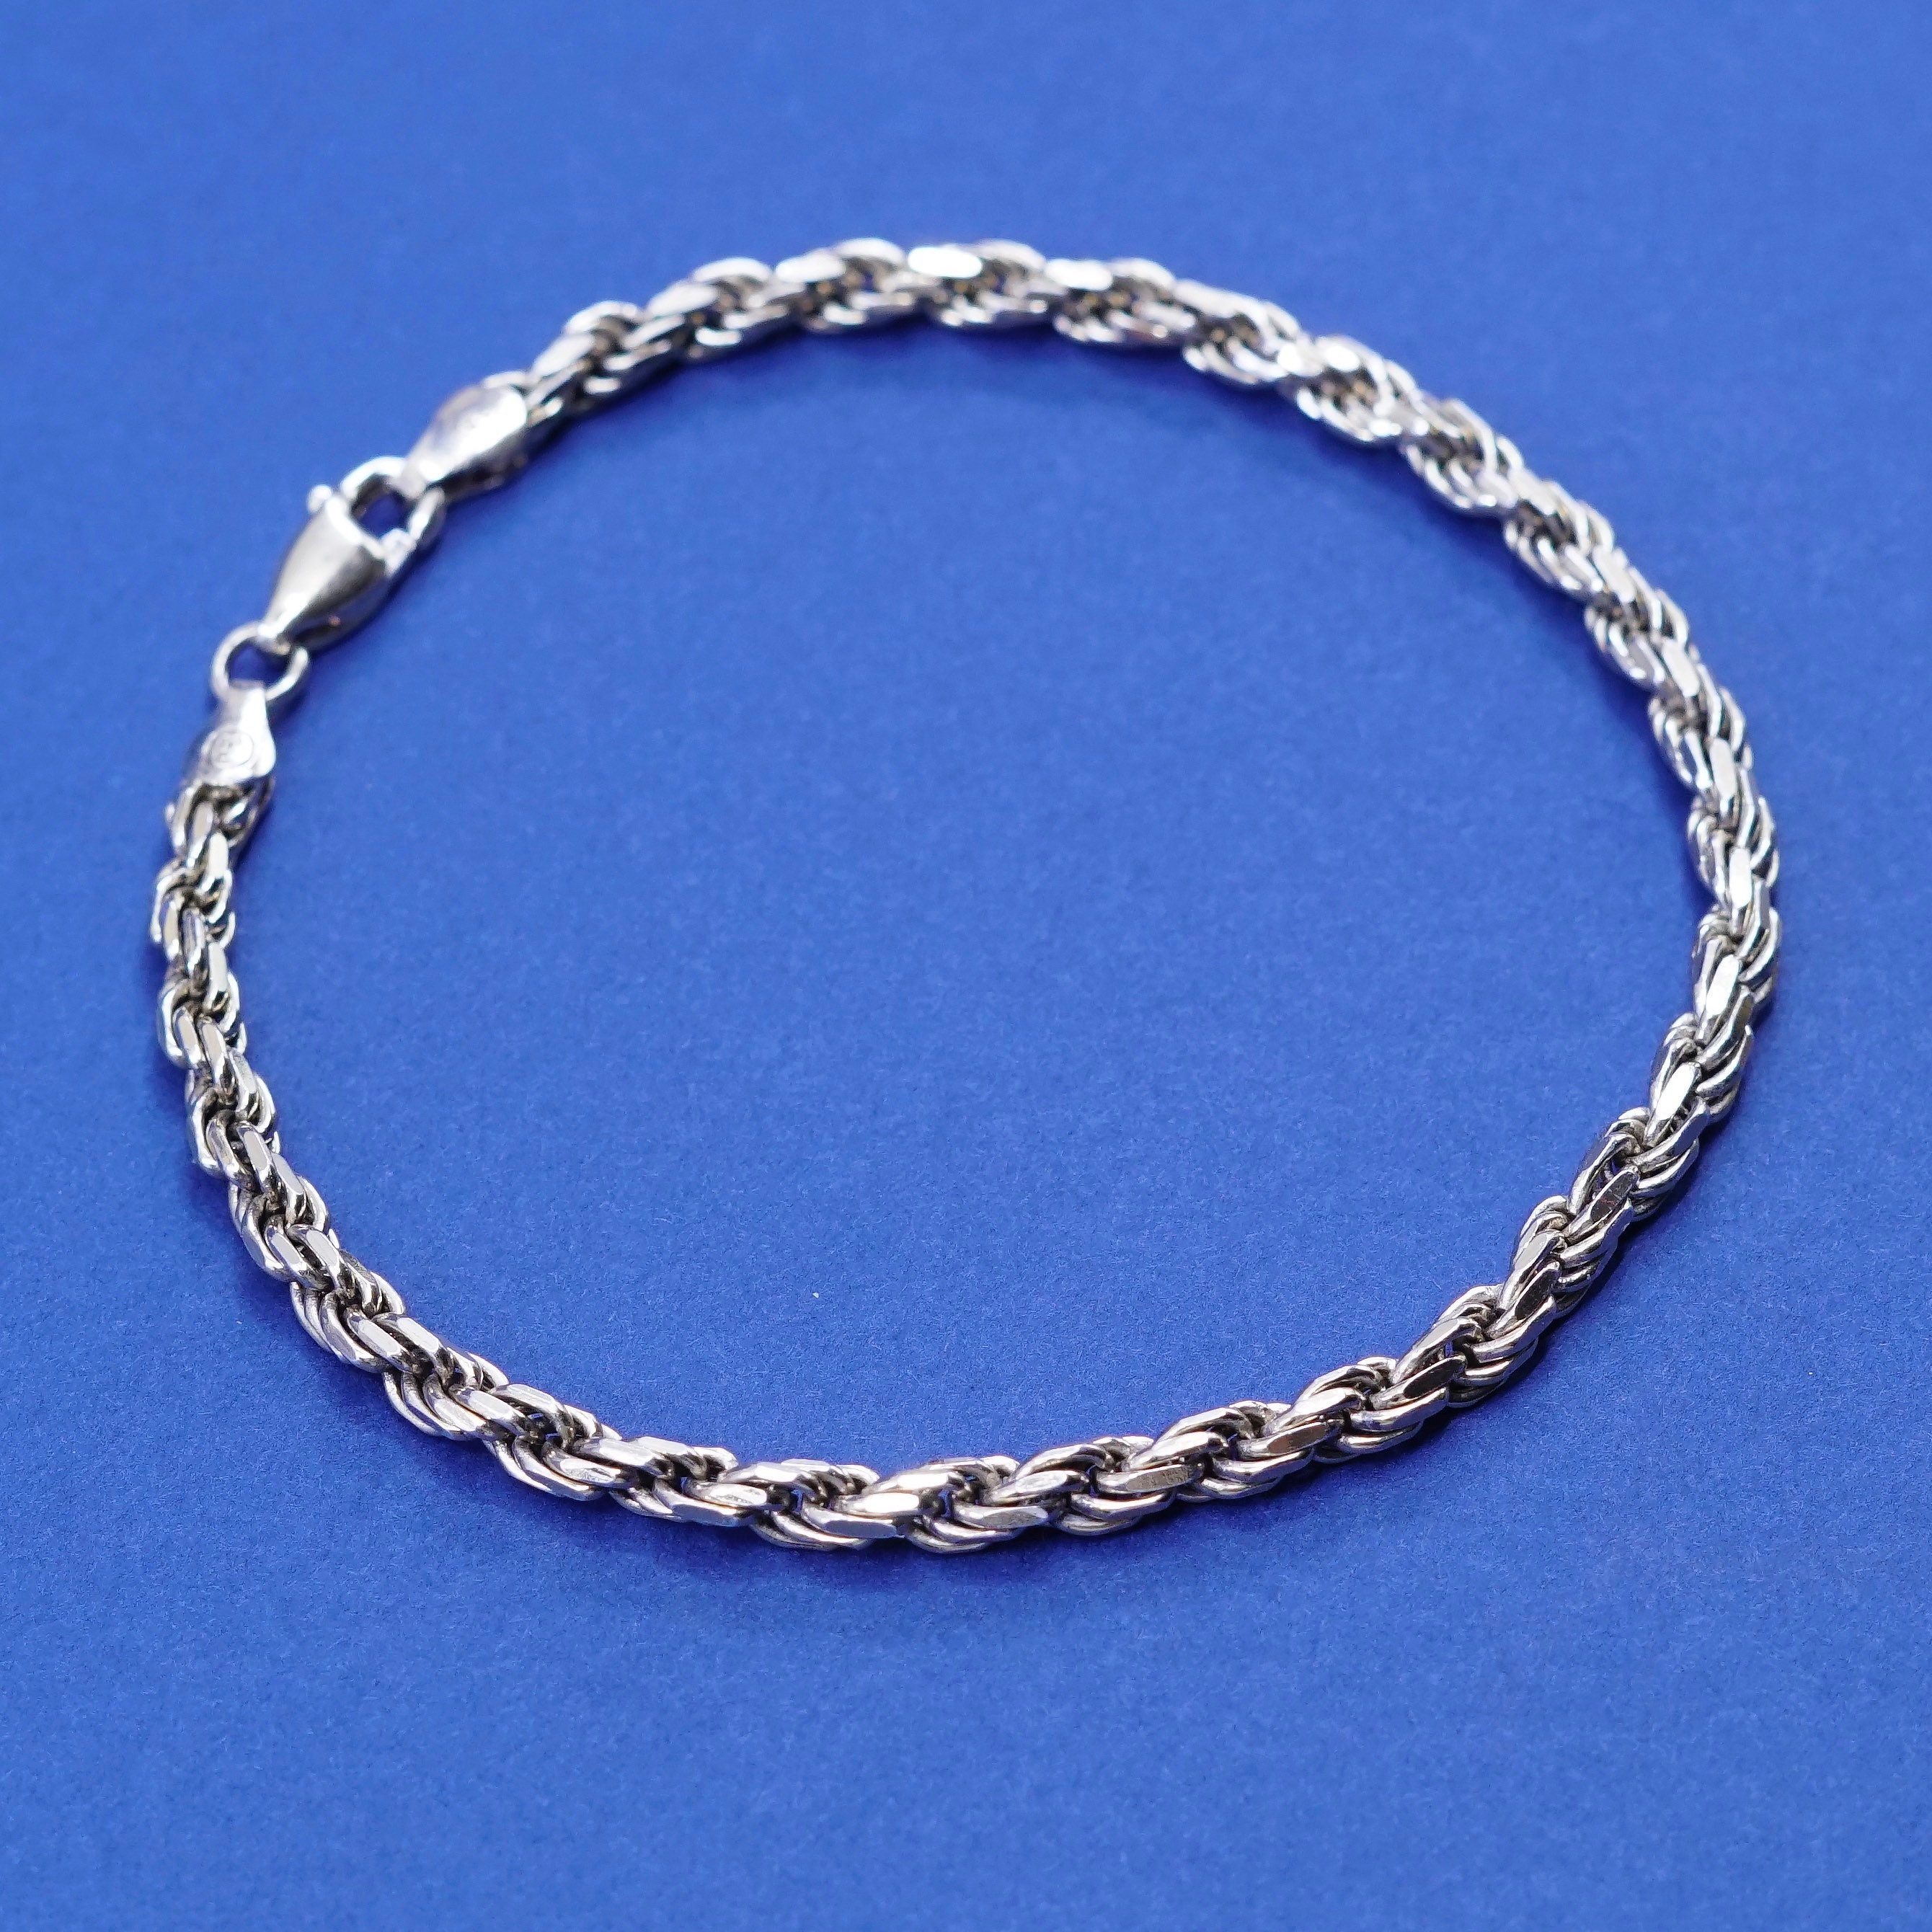 KA 1772 ITALY .925 Stirling Silver Circle Chain Necklace 24 inches |  #472425496